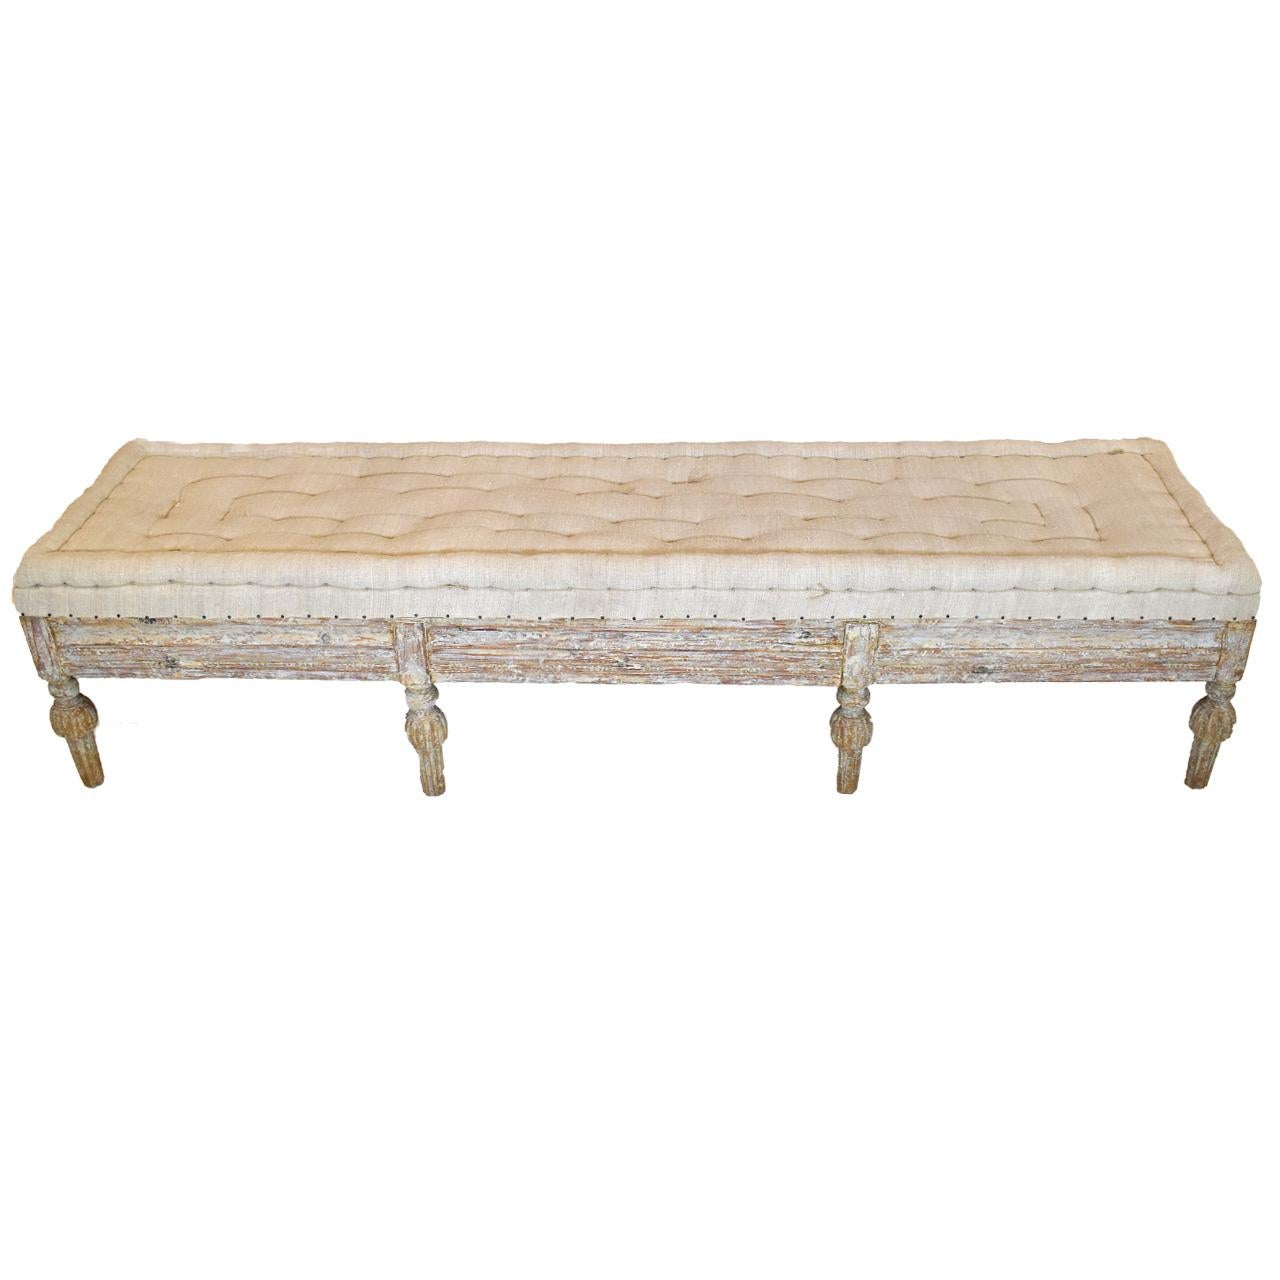 Extended length sets apart this classic Swedish bench. Carved on three sides upholstered in European burlap with tacks.